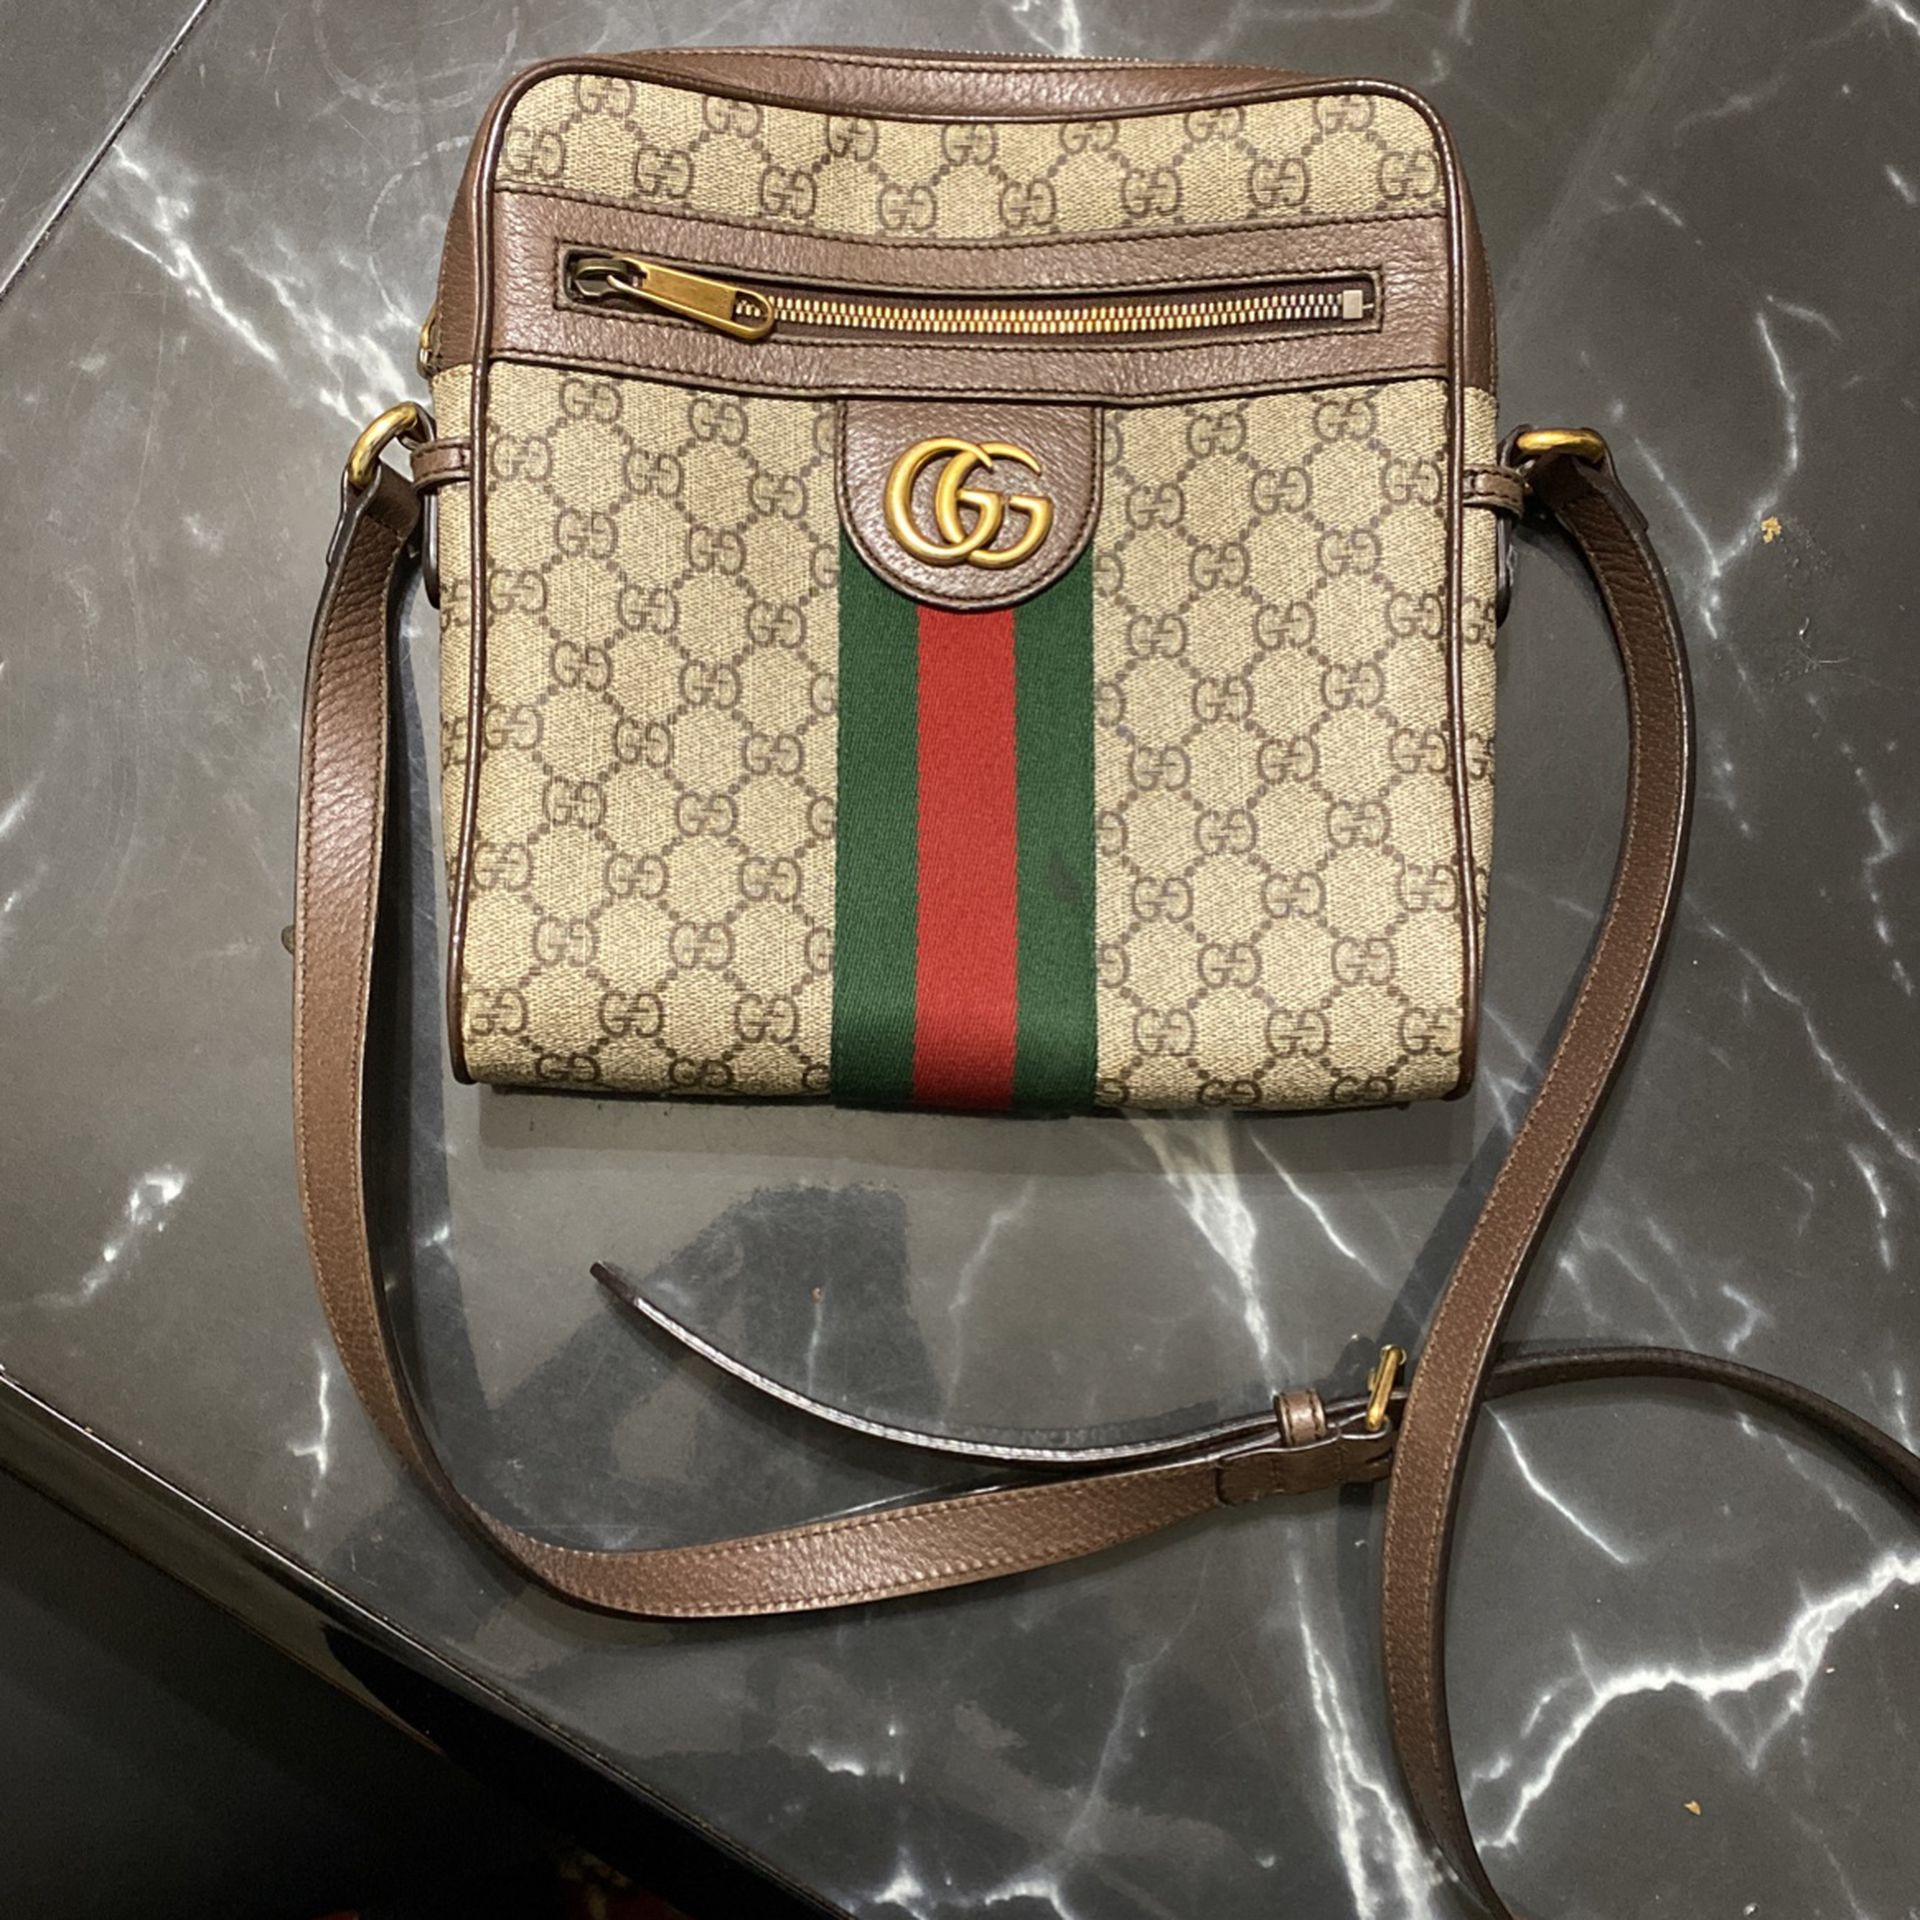 Authentic Real Gucci Bag